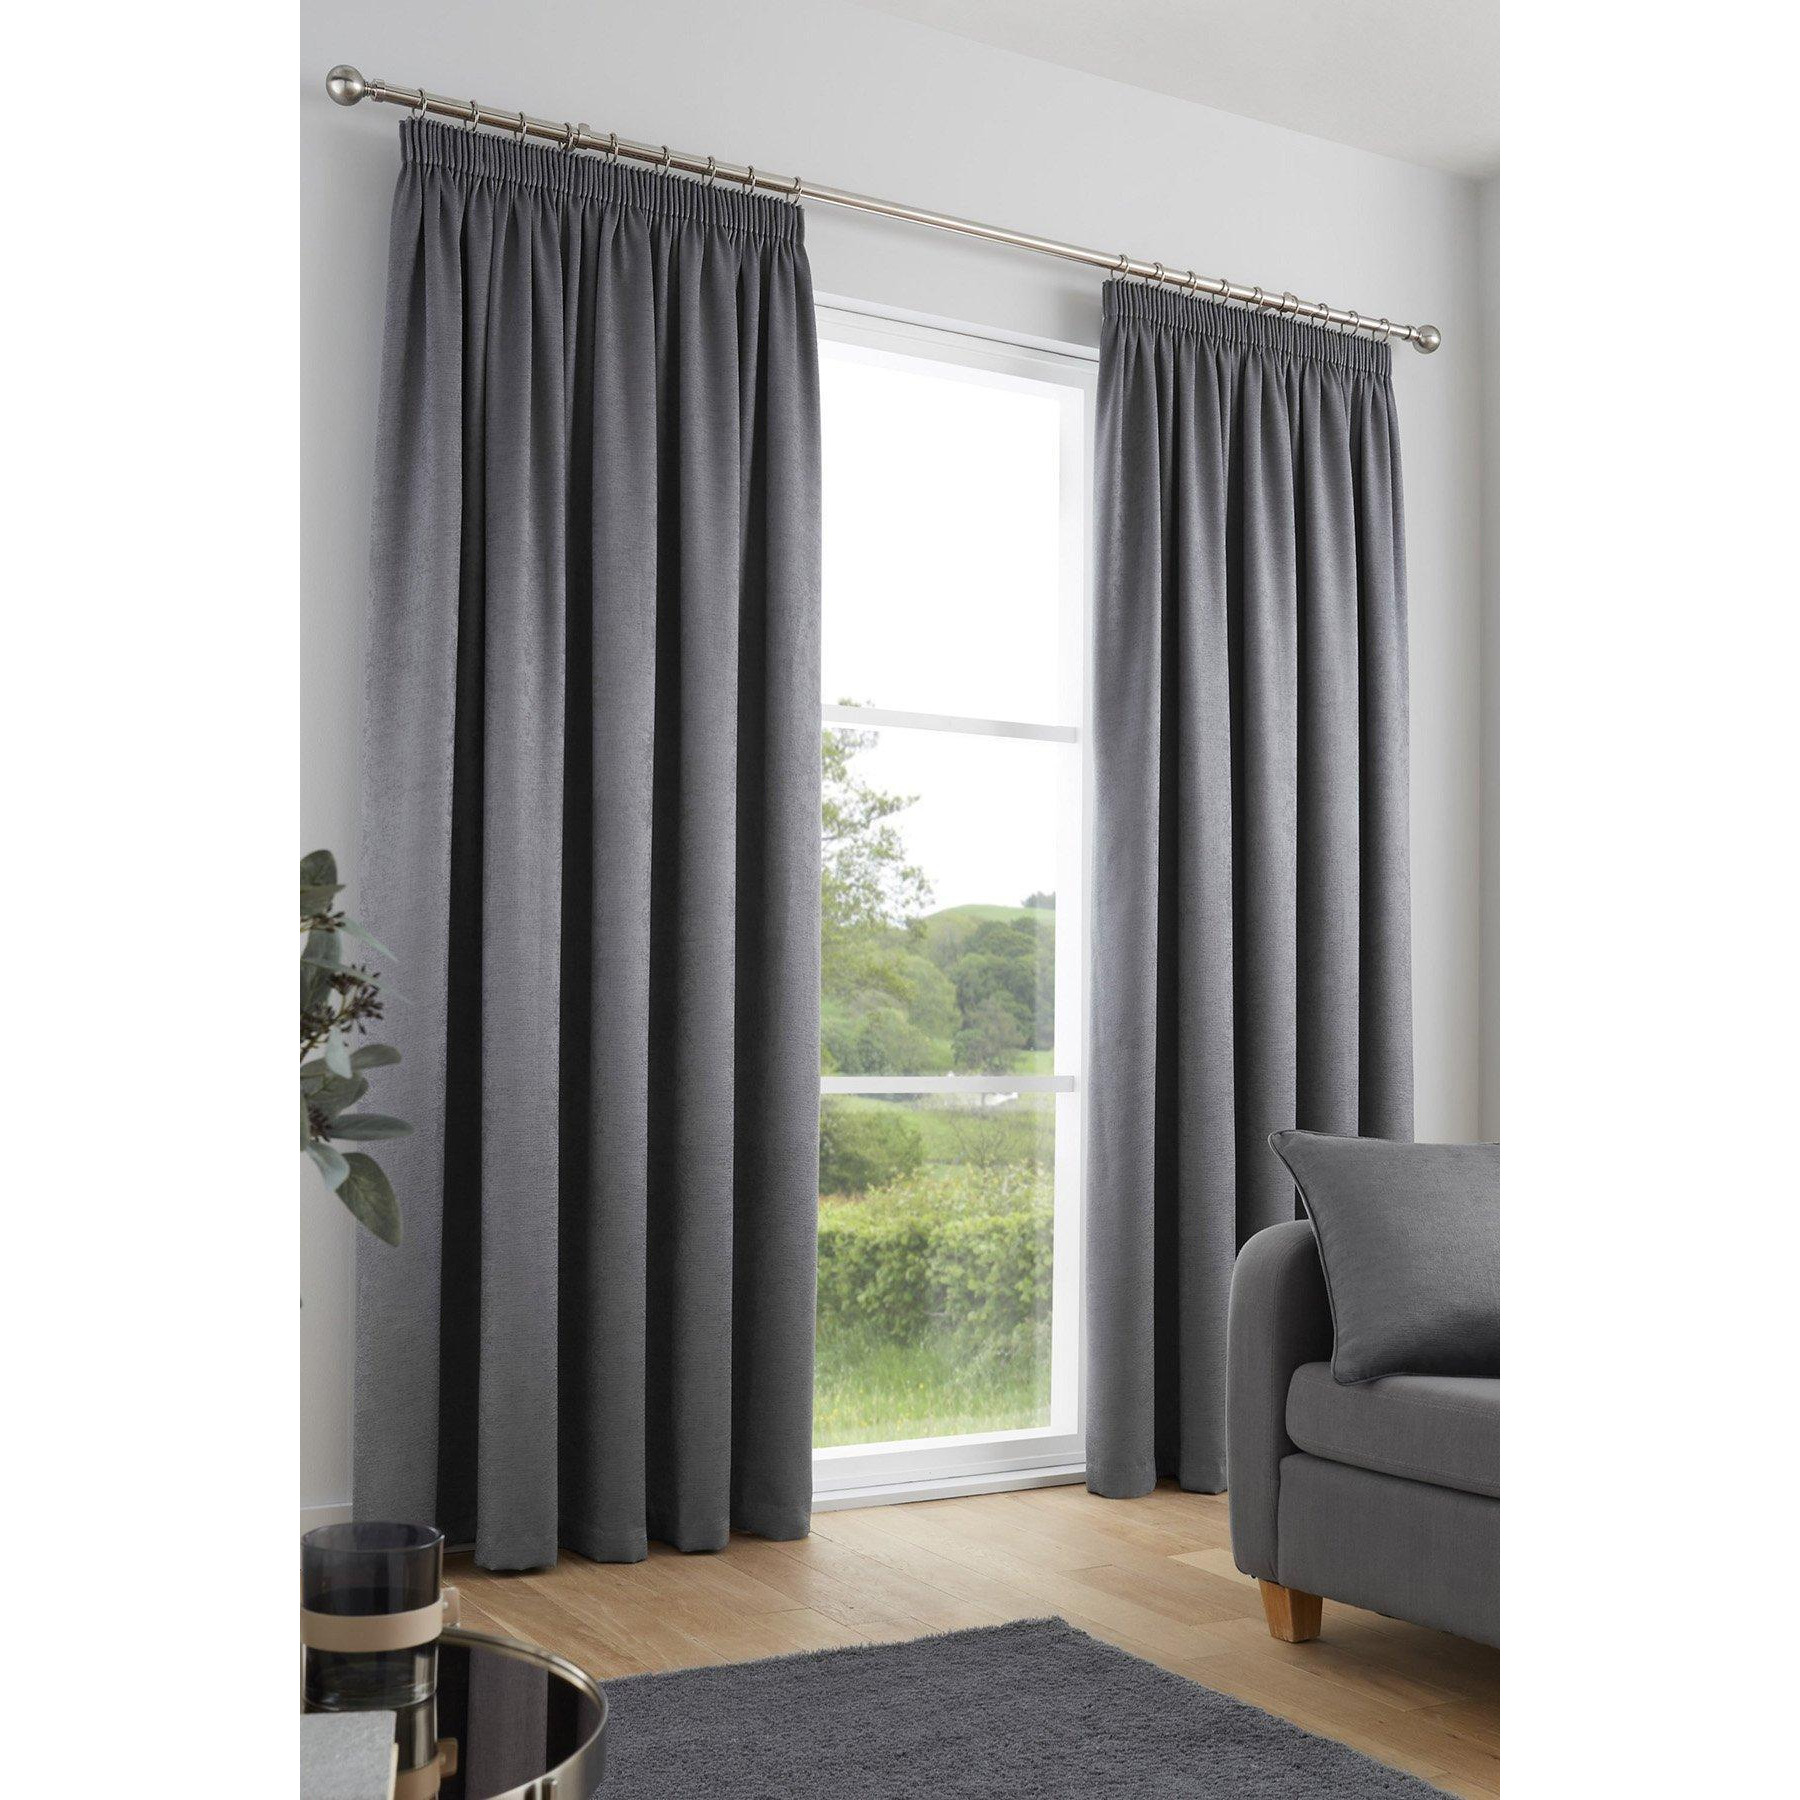 'Galaxy' Pair of Light Reducing Thermal Effect Pencil Pleat Curtains - image 1